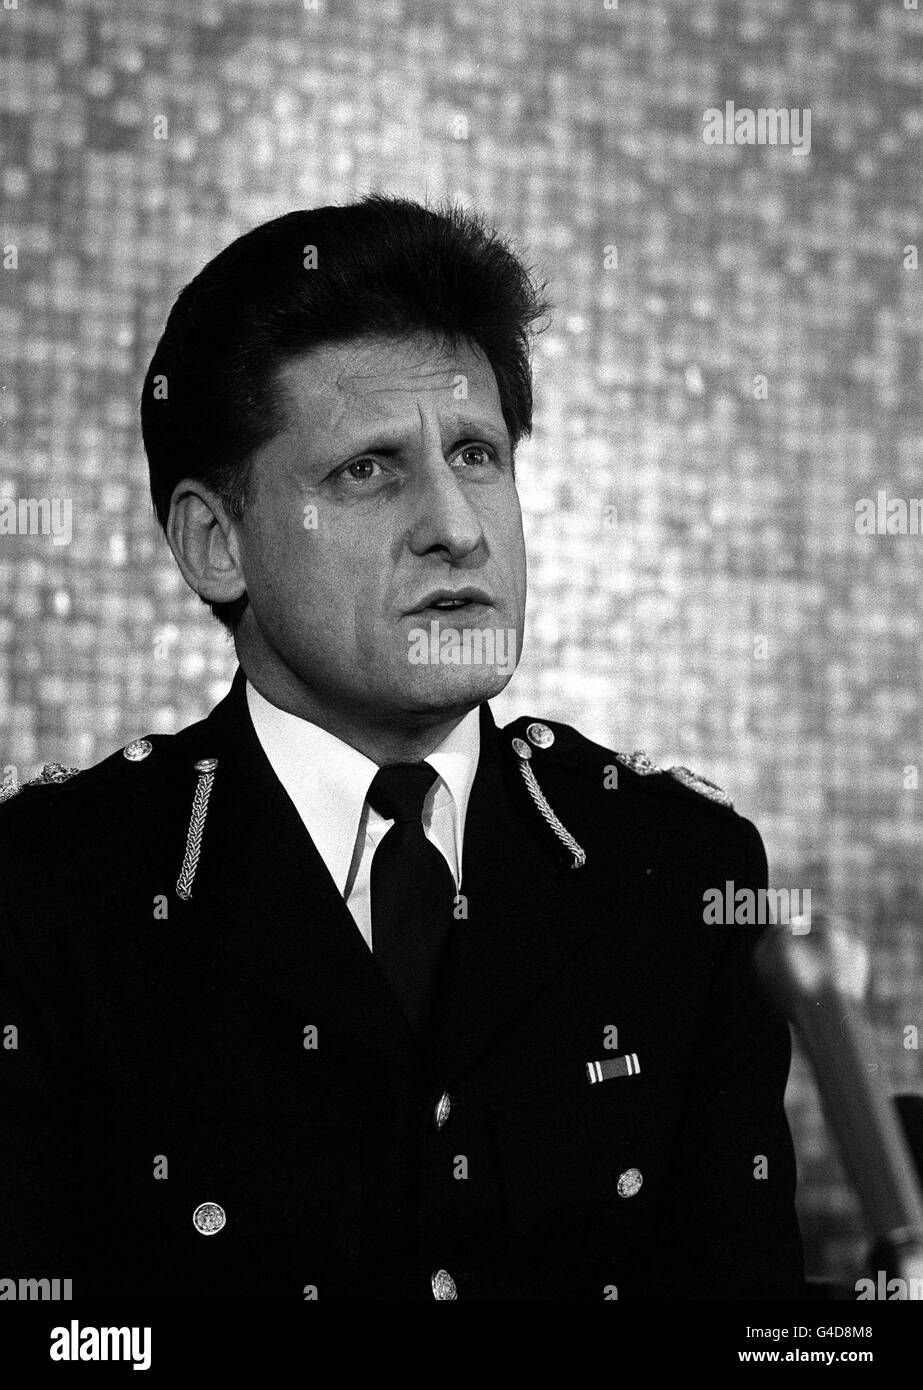 PA NEWS PHOTO 7/2/87 RICHARD WELLS, DEPUTY ASSISTANT COMMISIONER OF THE METROPOLITAN POLICE, NORTH-WEST AREA AT A PRESS CONFERENCE AT HOLBORN POLICE STATION, LONDON FOLLOWING LAST NIGHT'S SHOOTING OUTSIDE SIR JOHN SOANE'S MUSEUM INVOLVING POLICE AND AN ARMED GANG Stock Photo